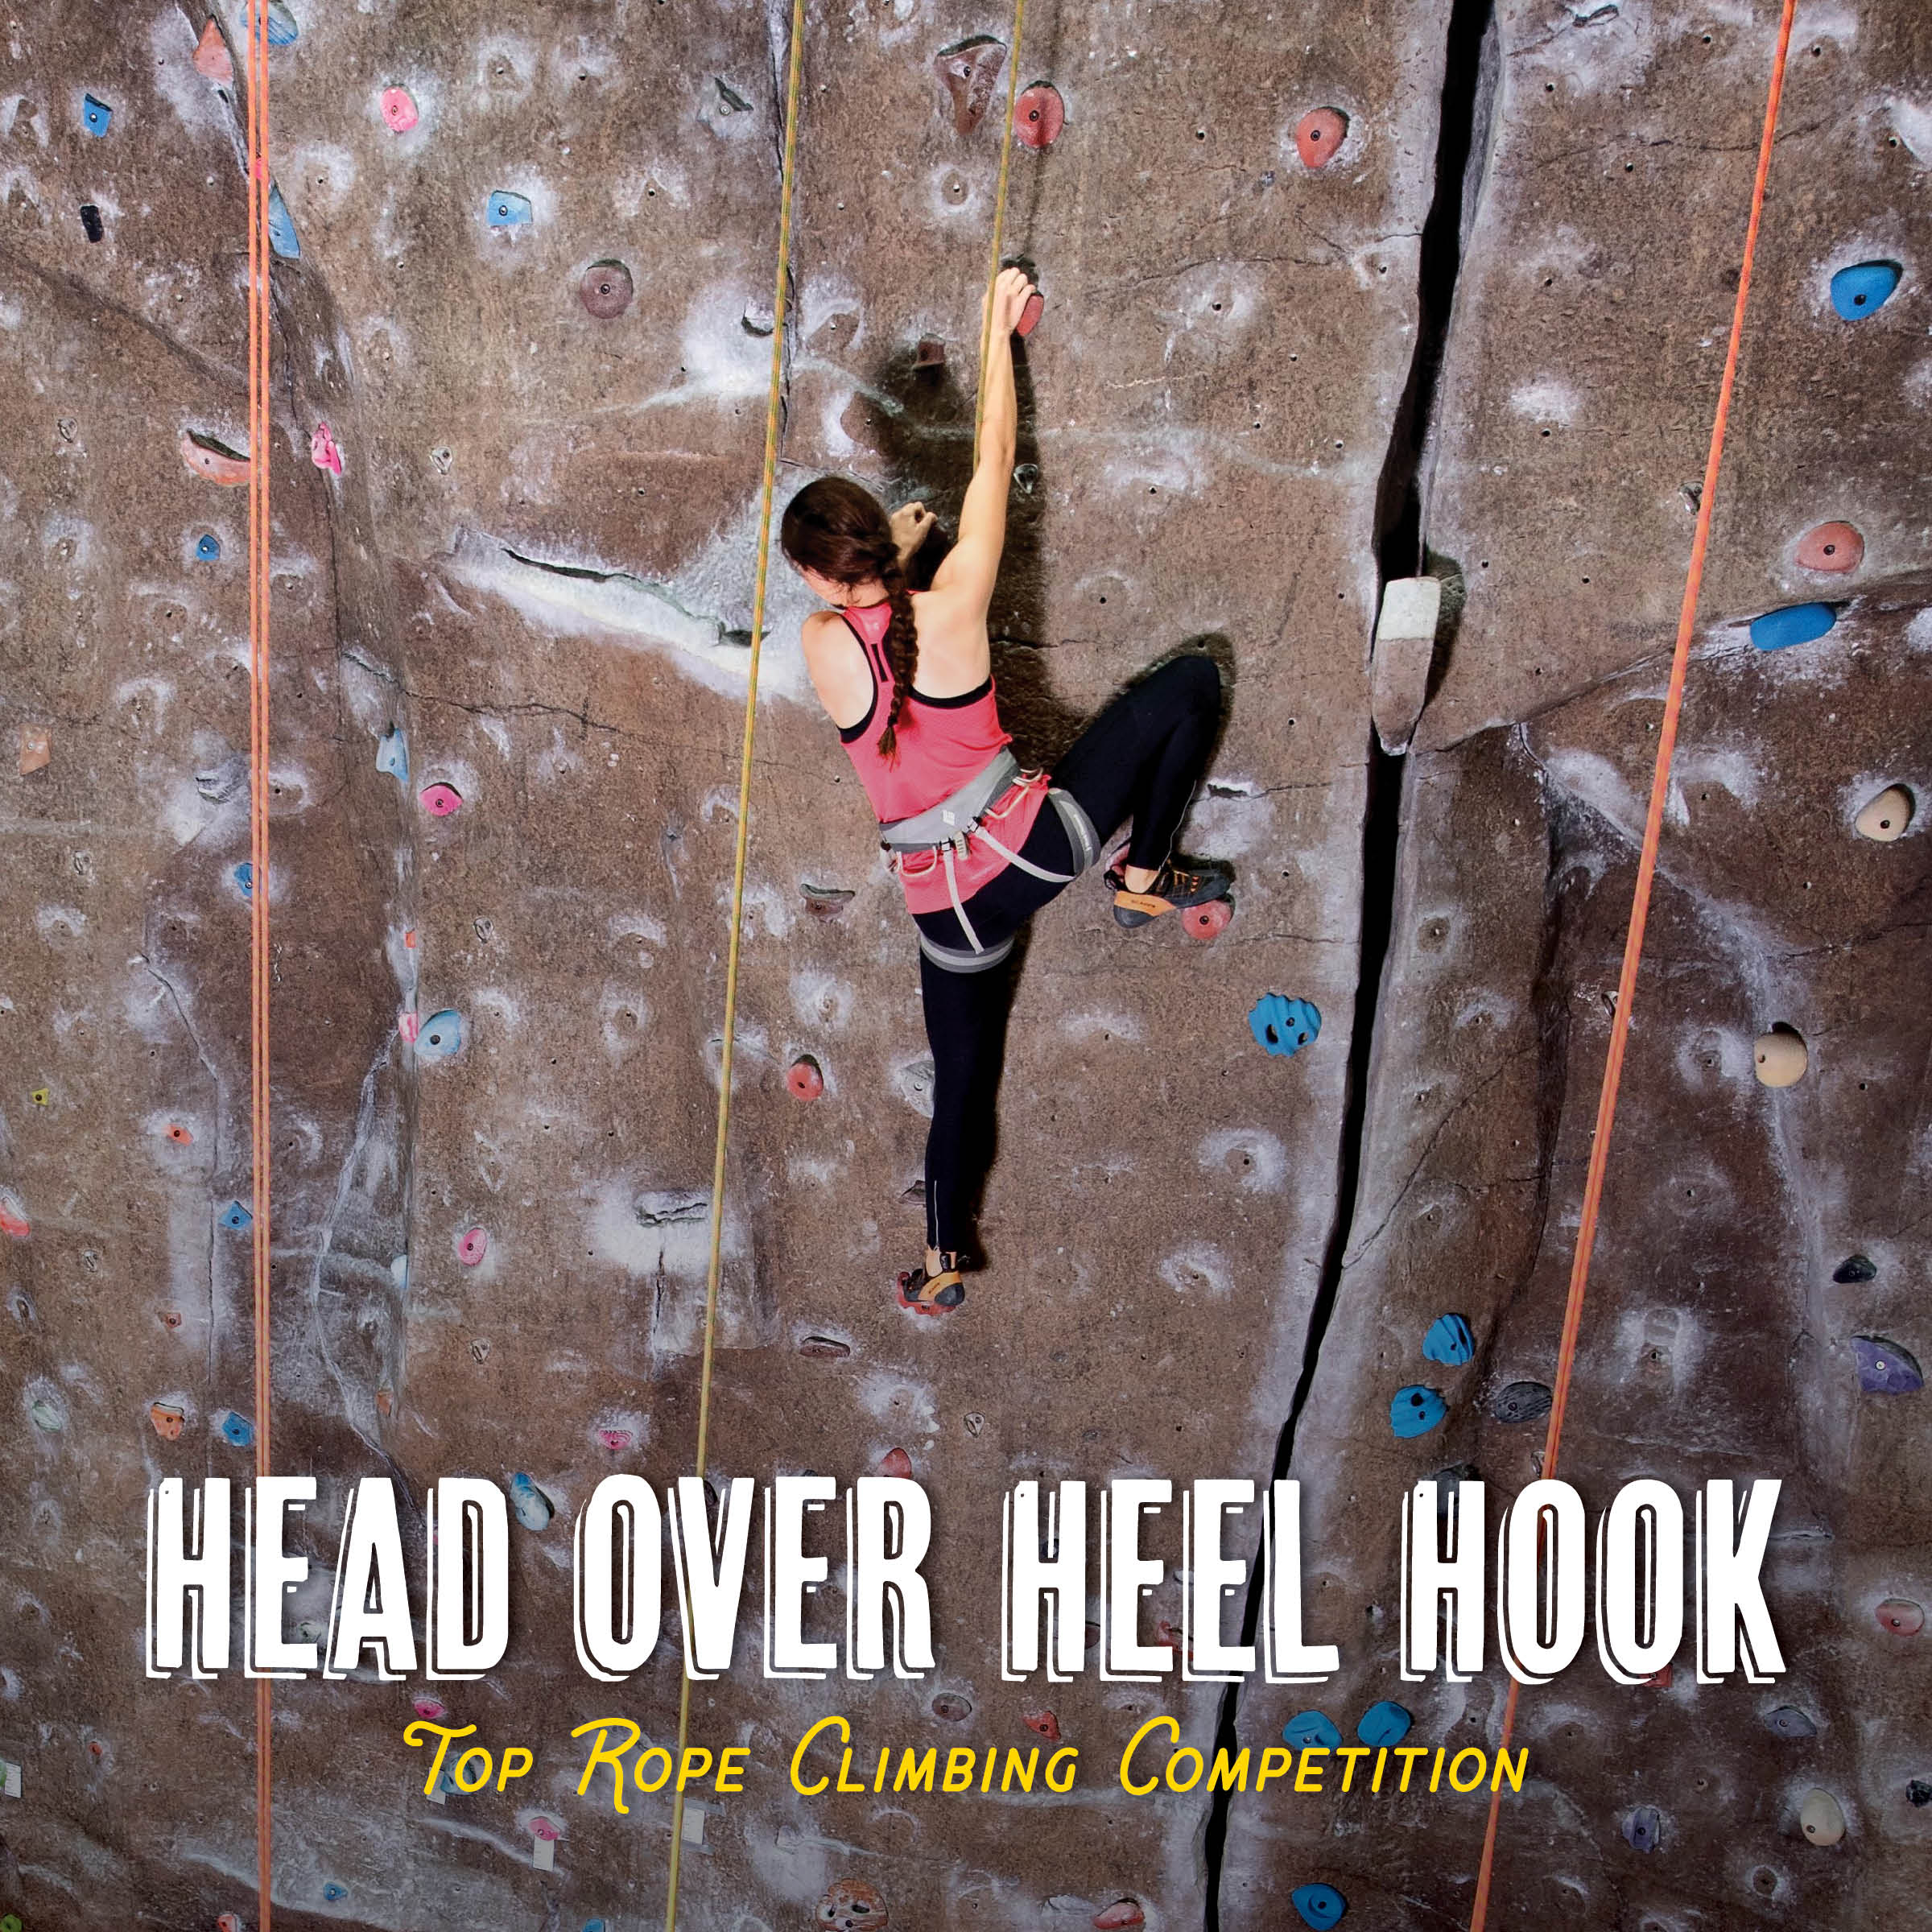 head over heel hook competition with a woman climbing